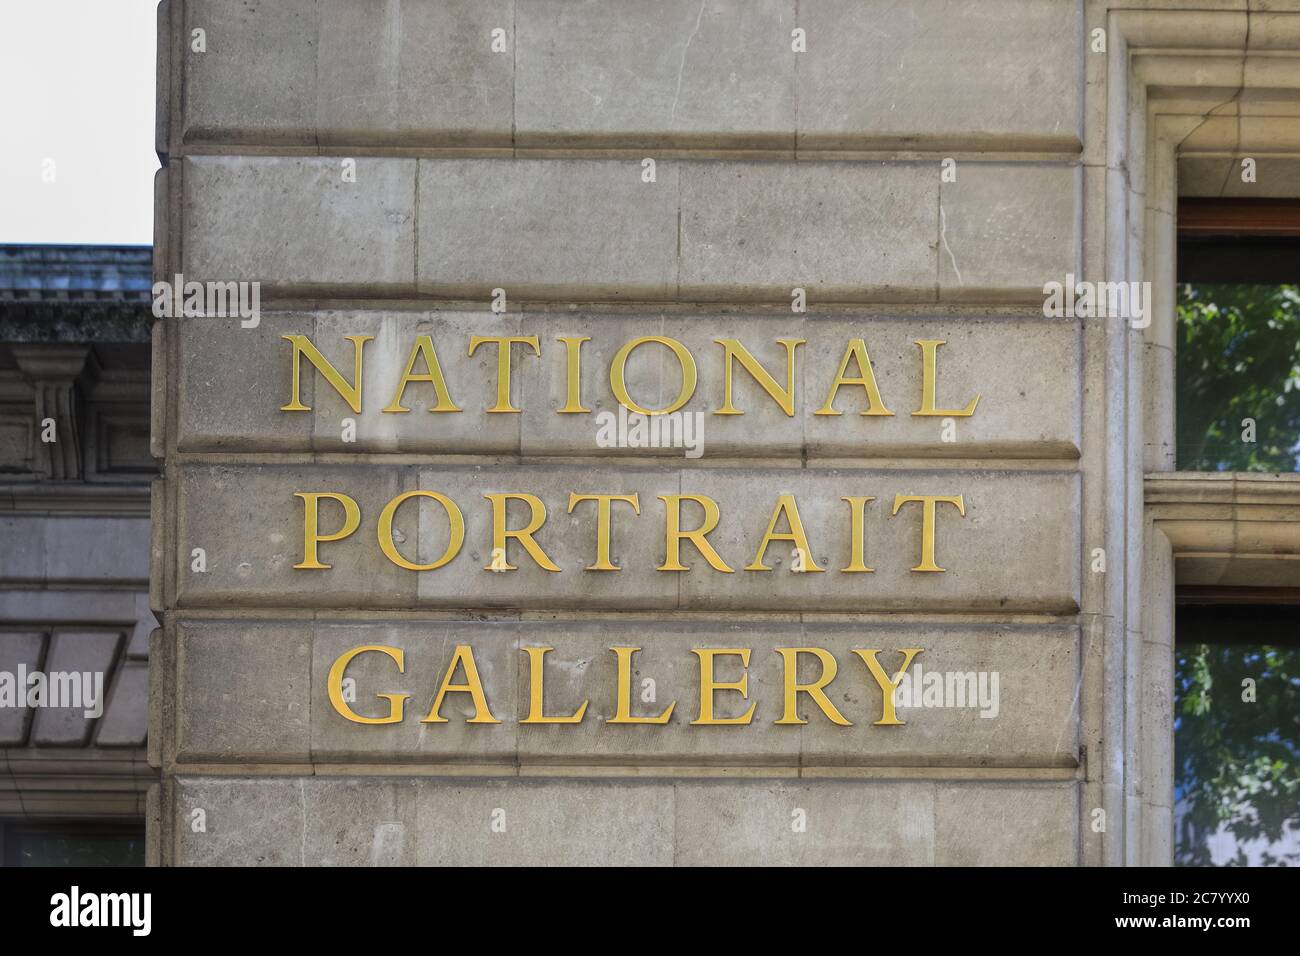 National Portrait Gallery sign and logo outside the building in London, England, UK Stock Photo